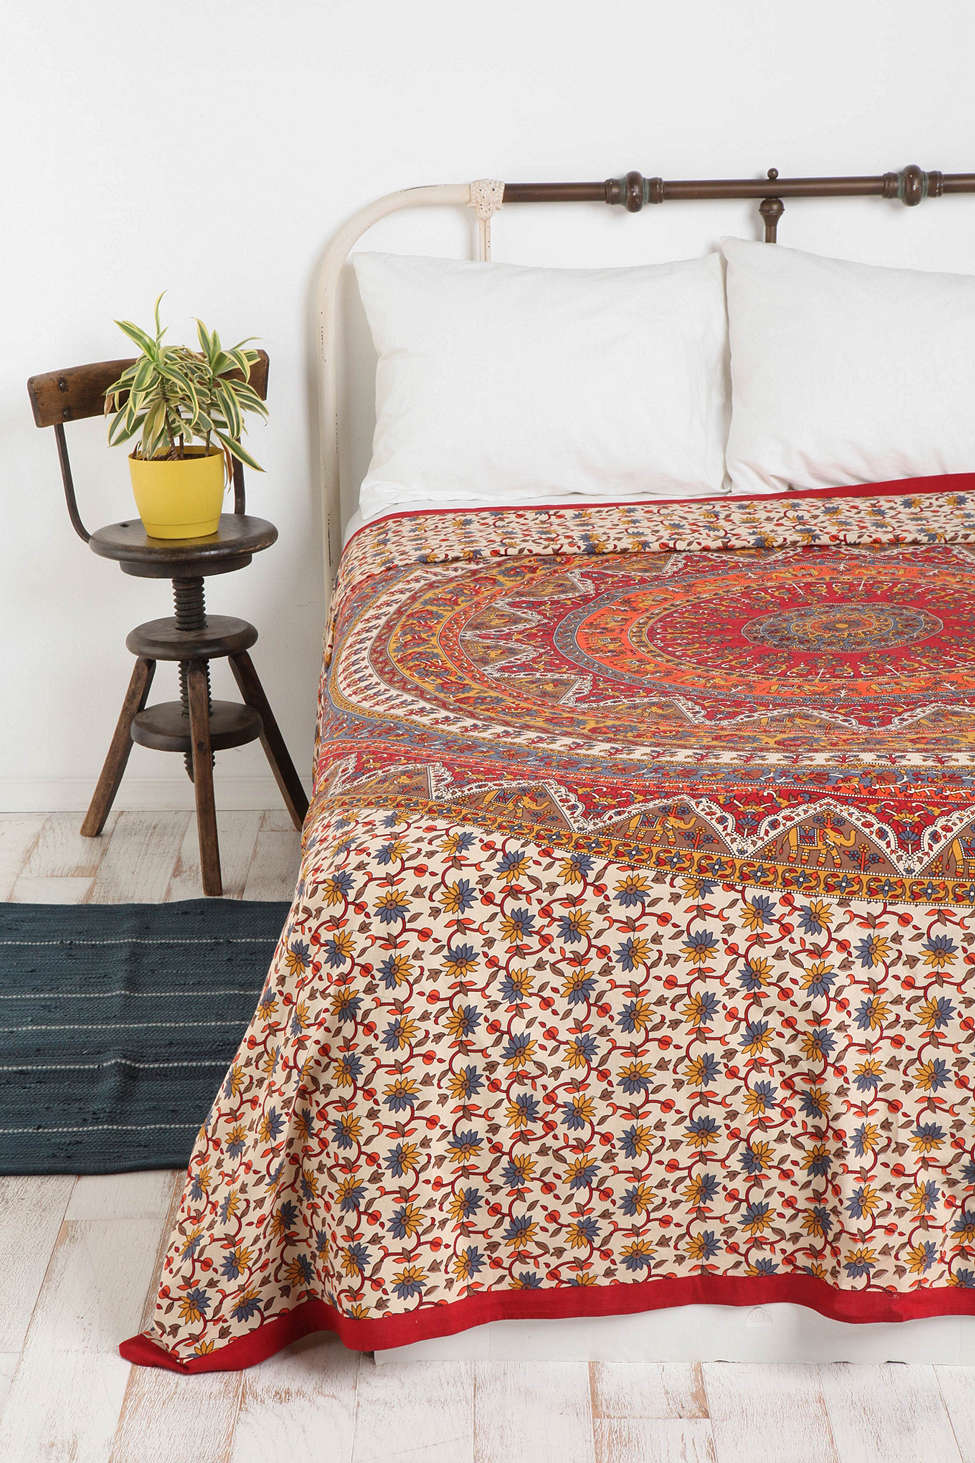 Decorate with Tapestry